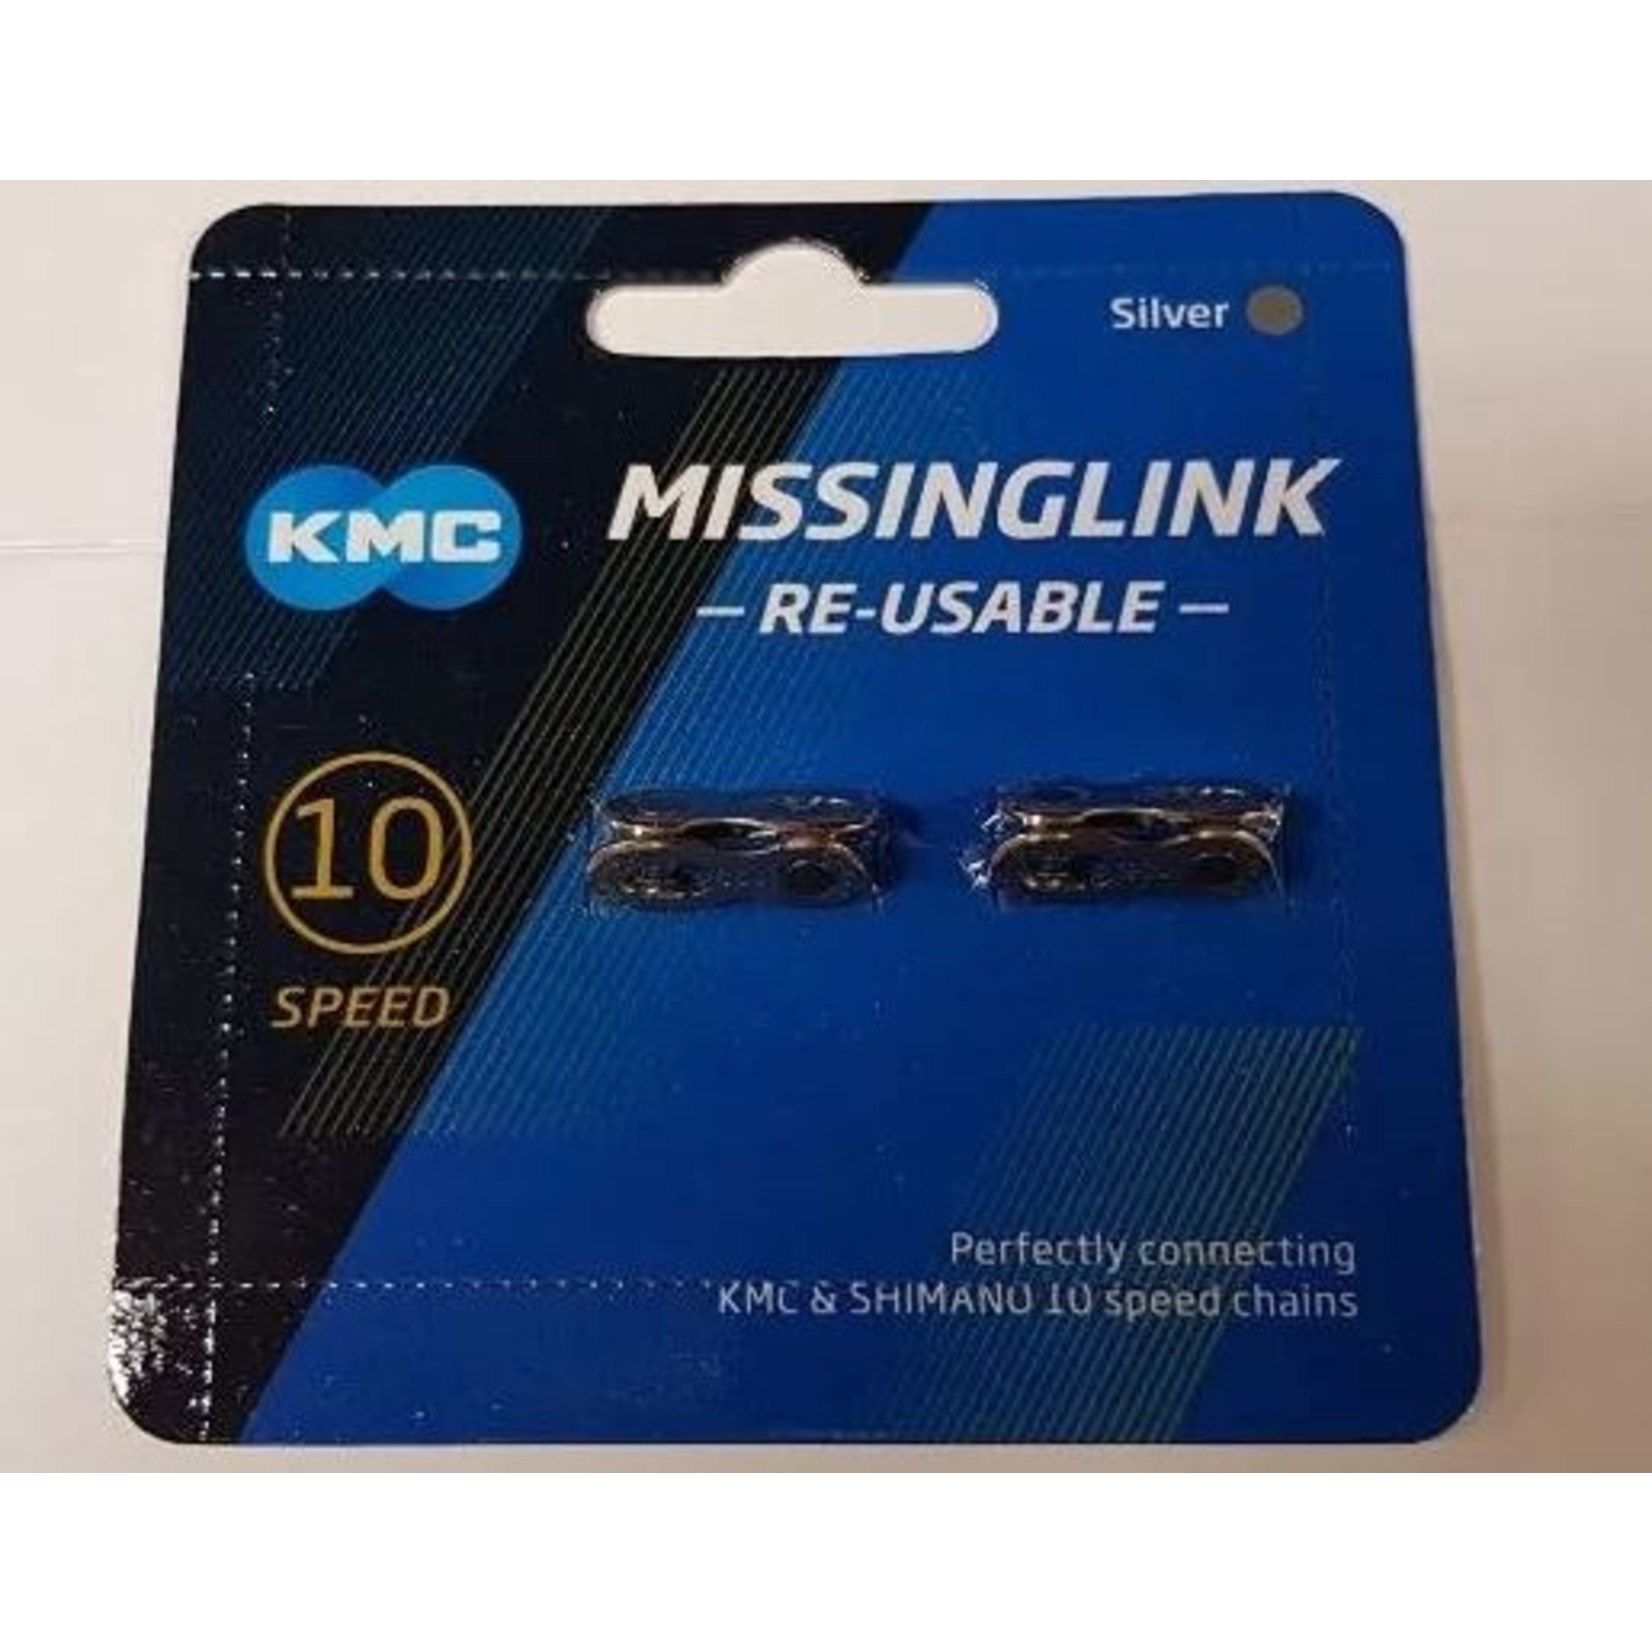 KMC KMC Bike Connecting Chain Links - 10 Speed - Silver - 2 Pcs/MF Card - 60mm